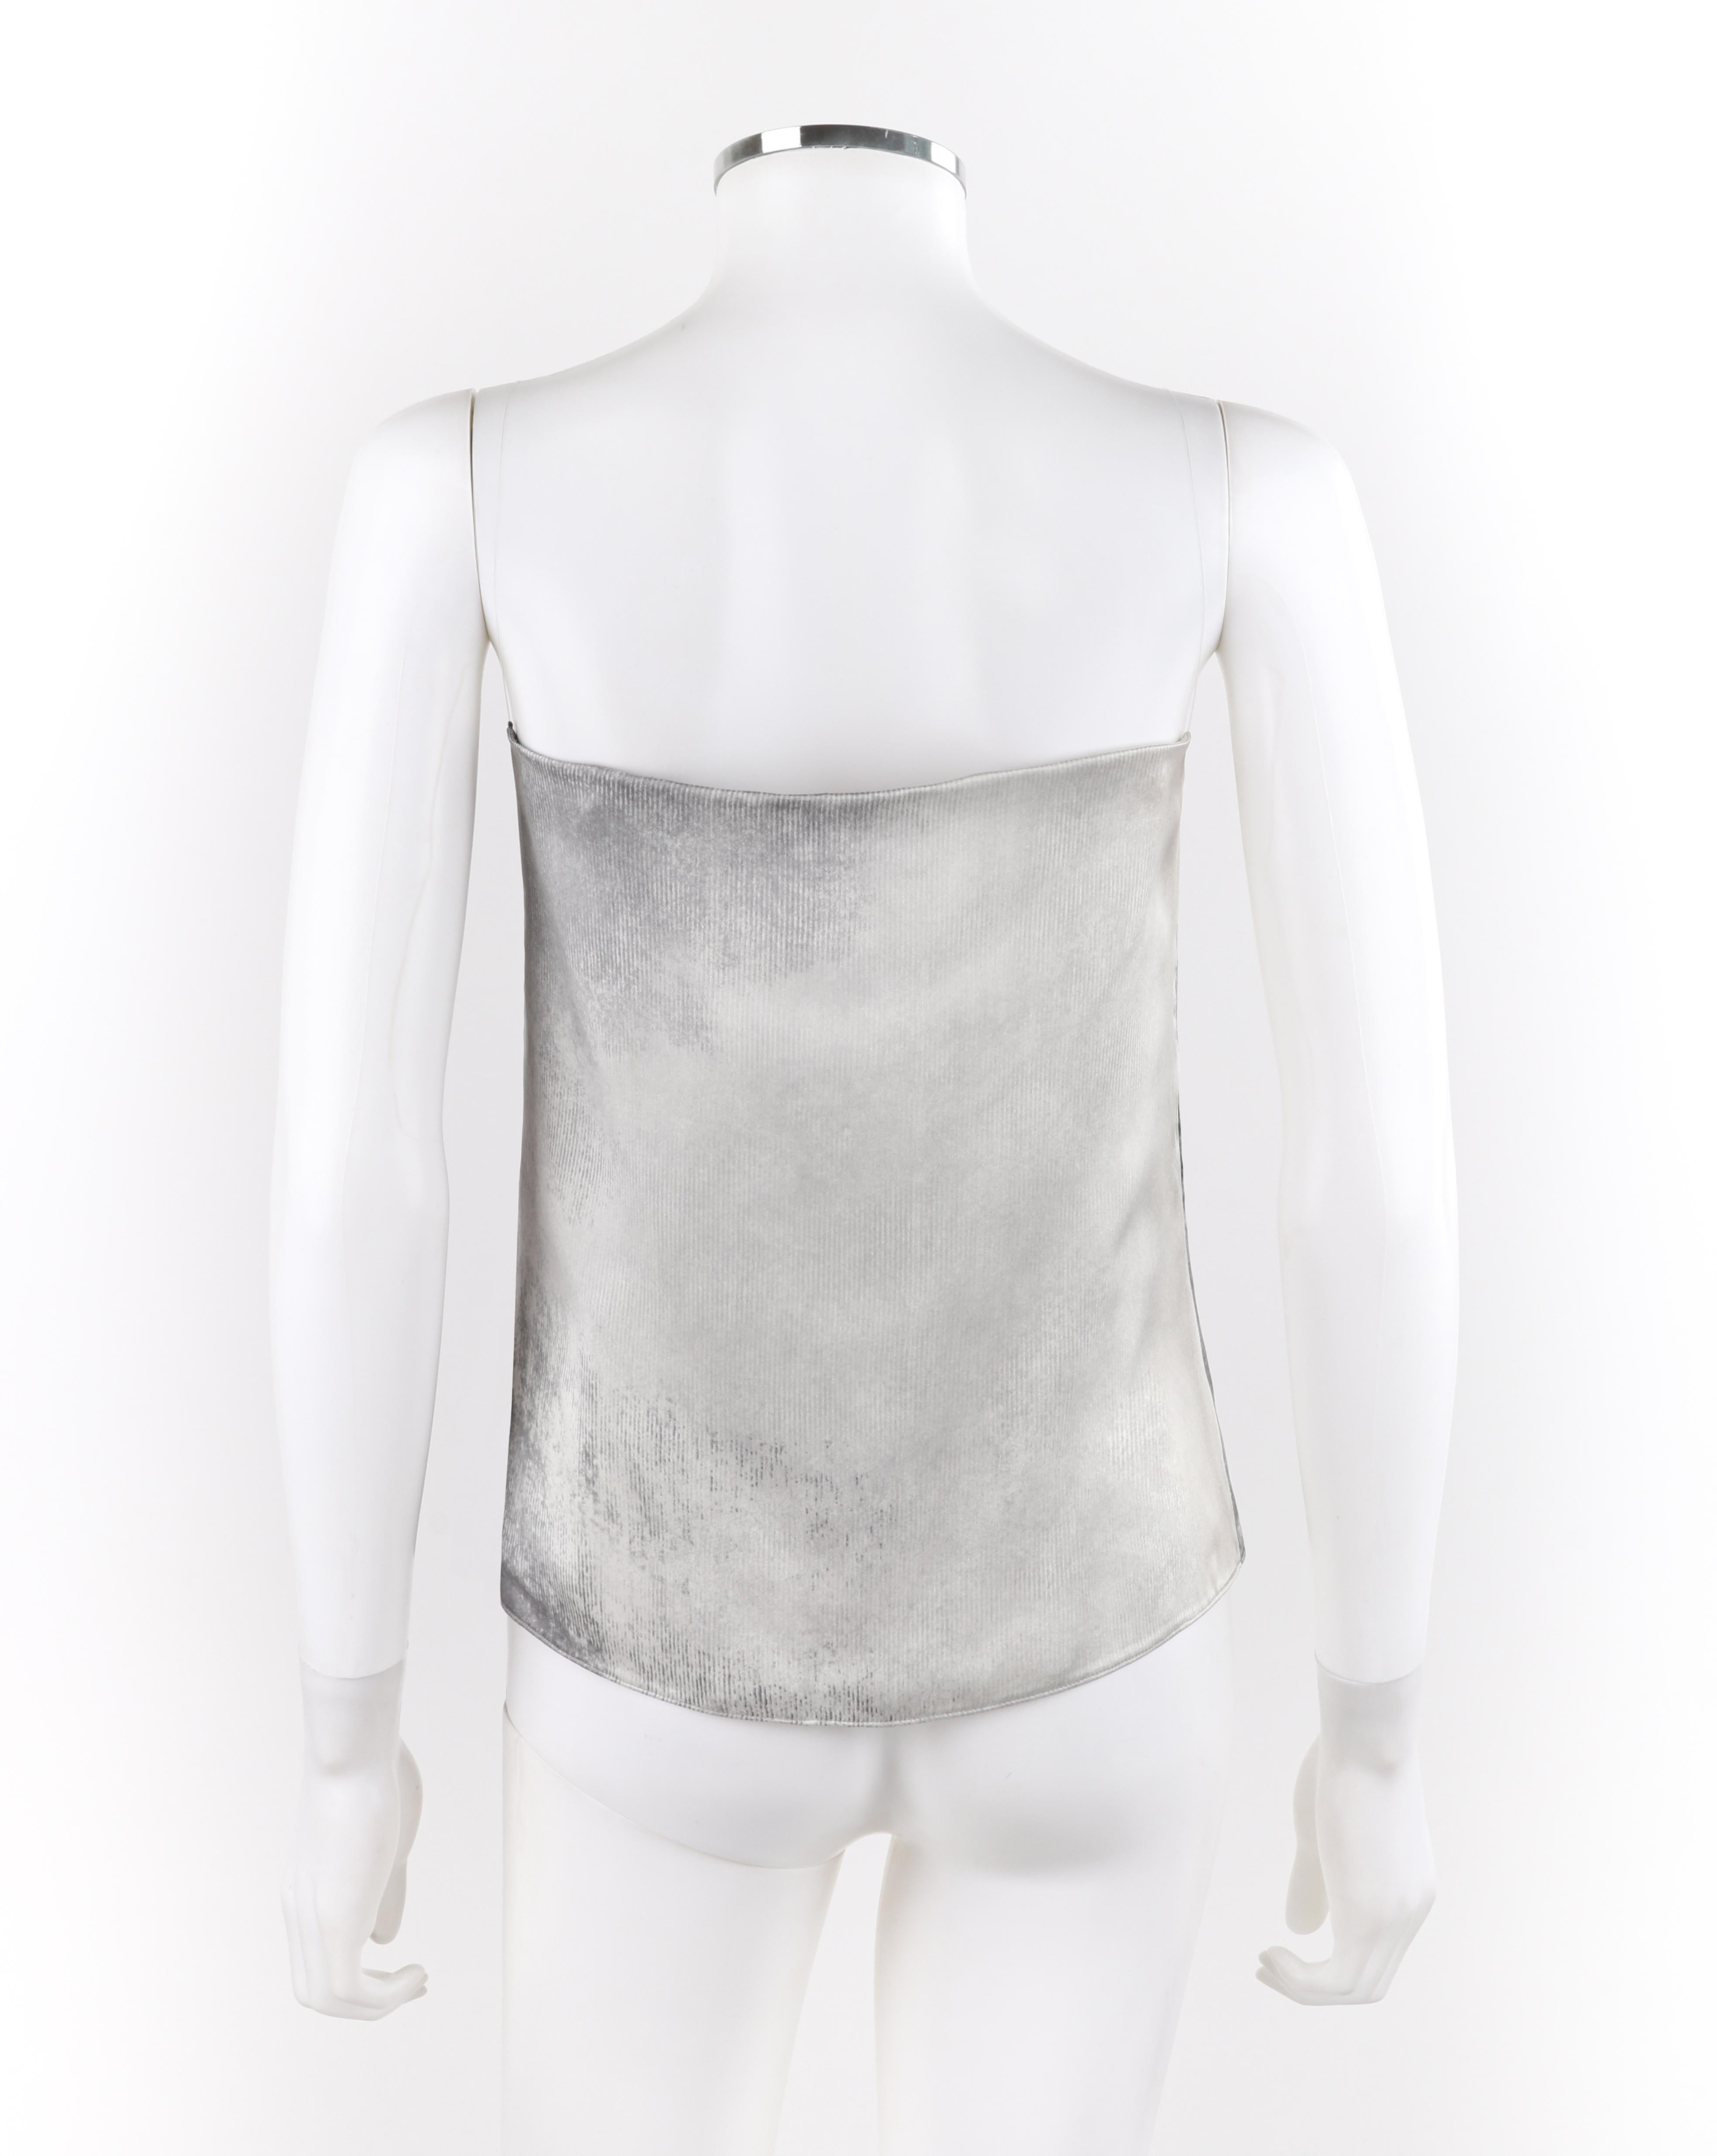 Gray GIVENCHY S/S 1999 ALEXANDER McQUEEN Black White Abstract Eye Illusion Tank Top For Sale